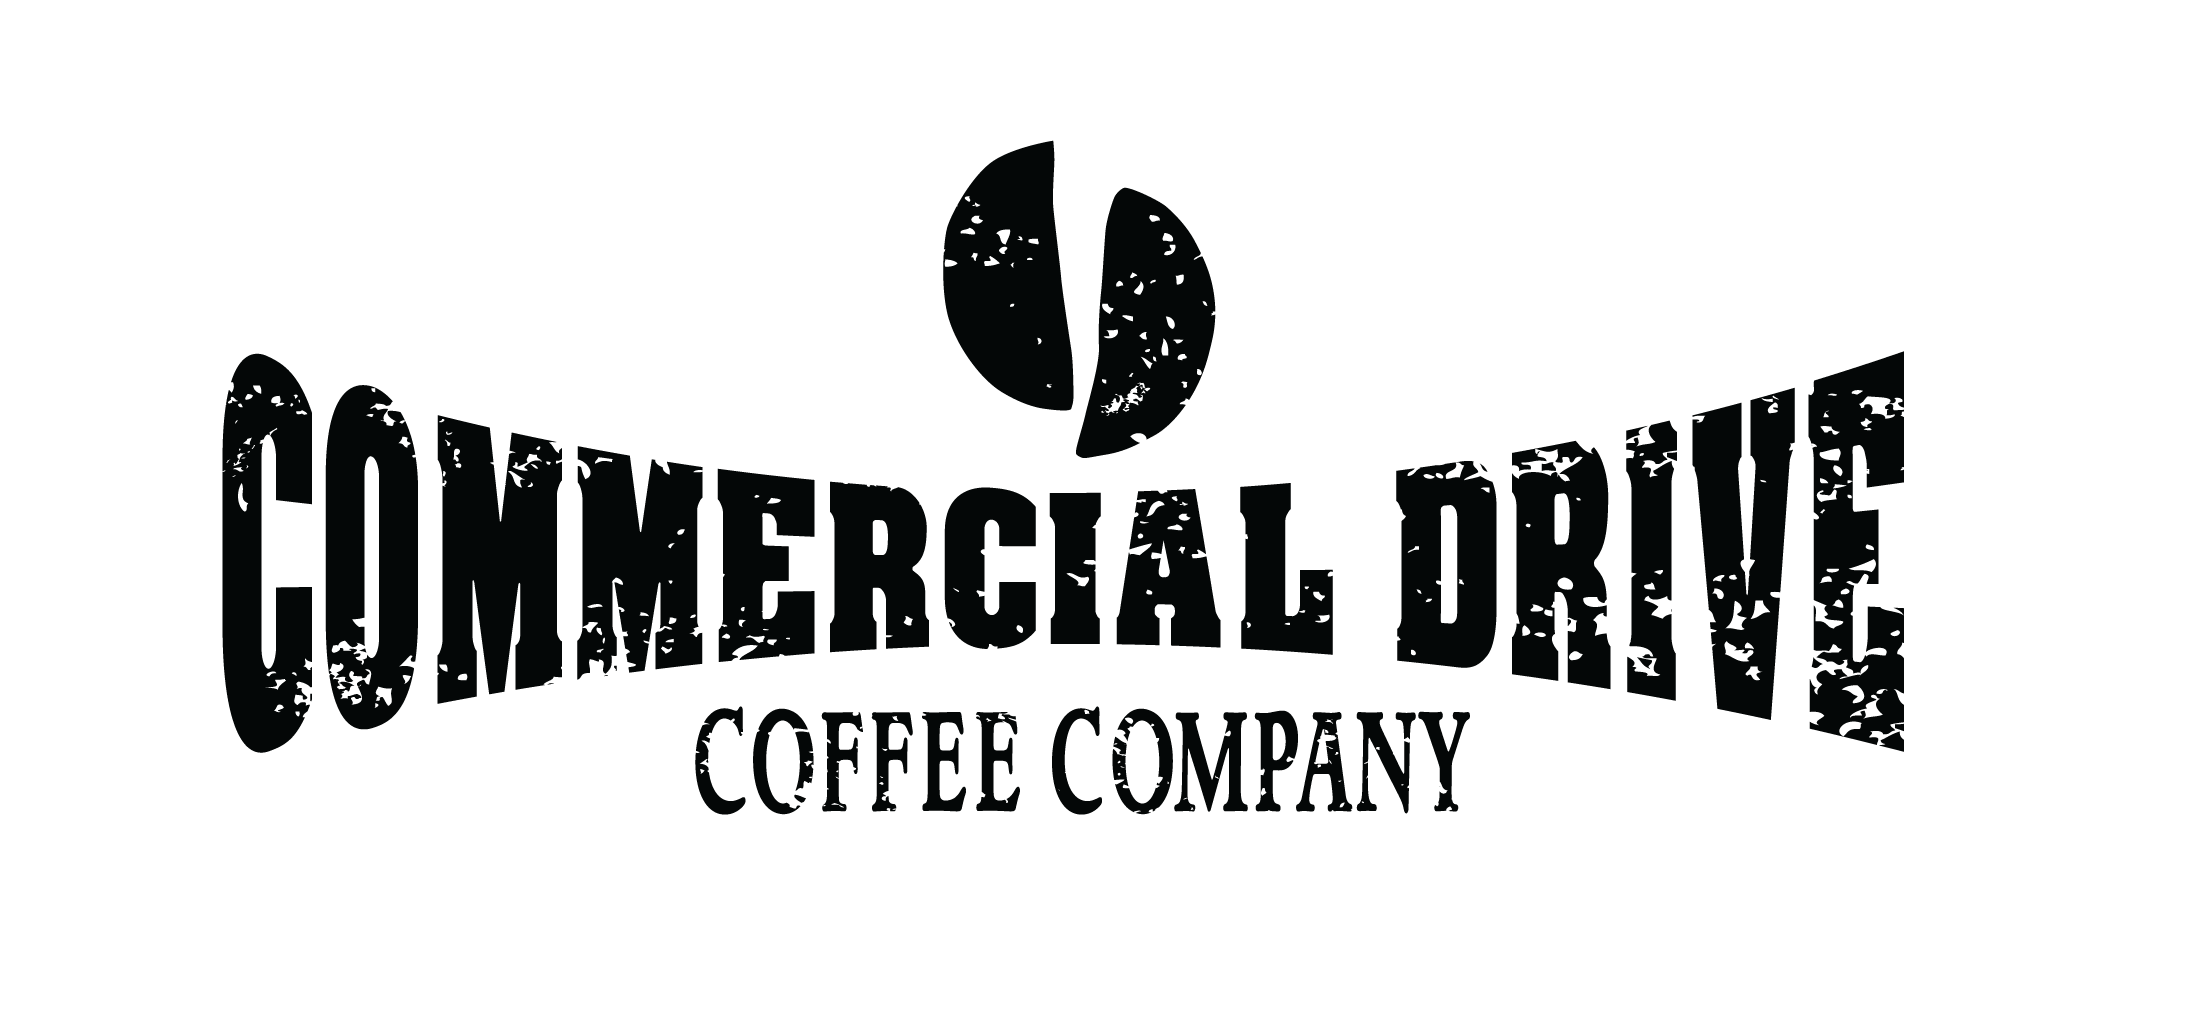 Commercial Drive Coffee Company